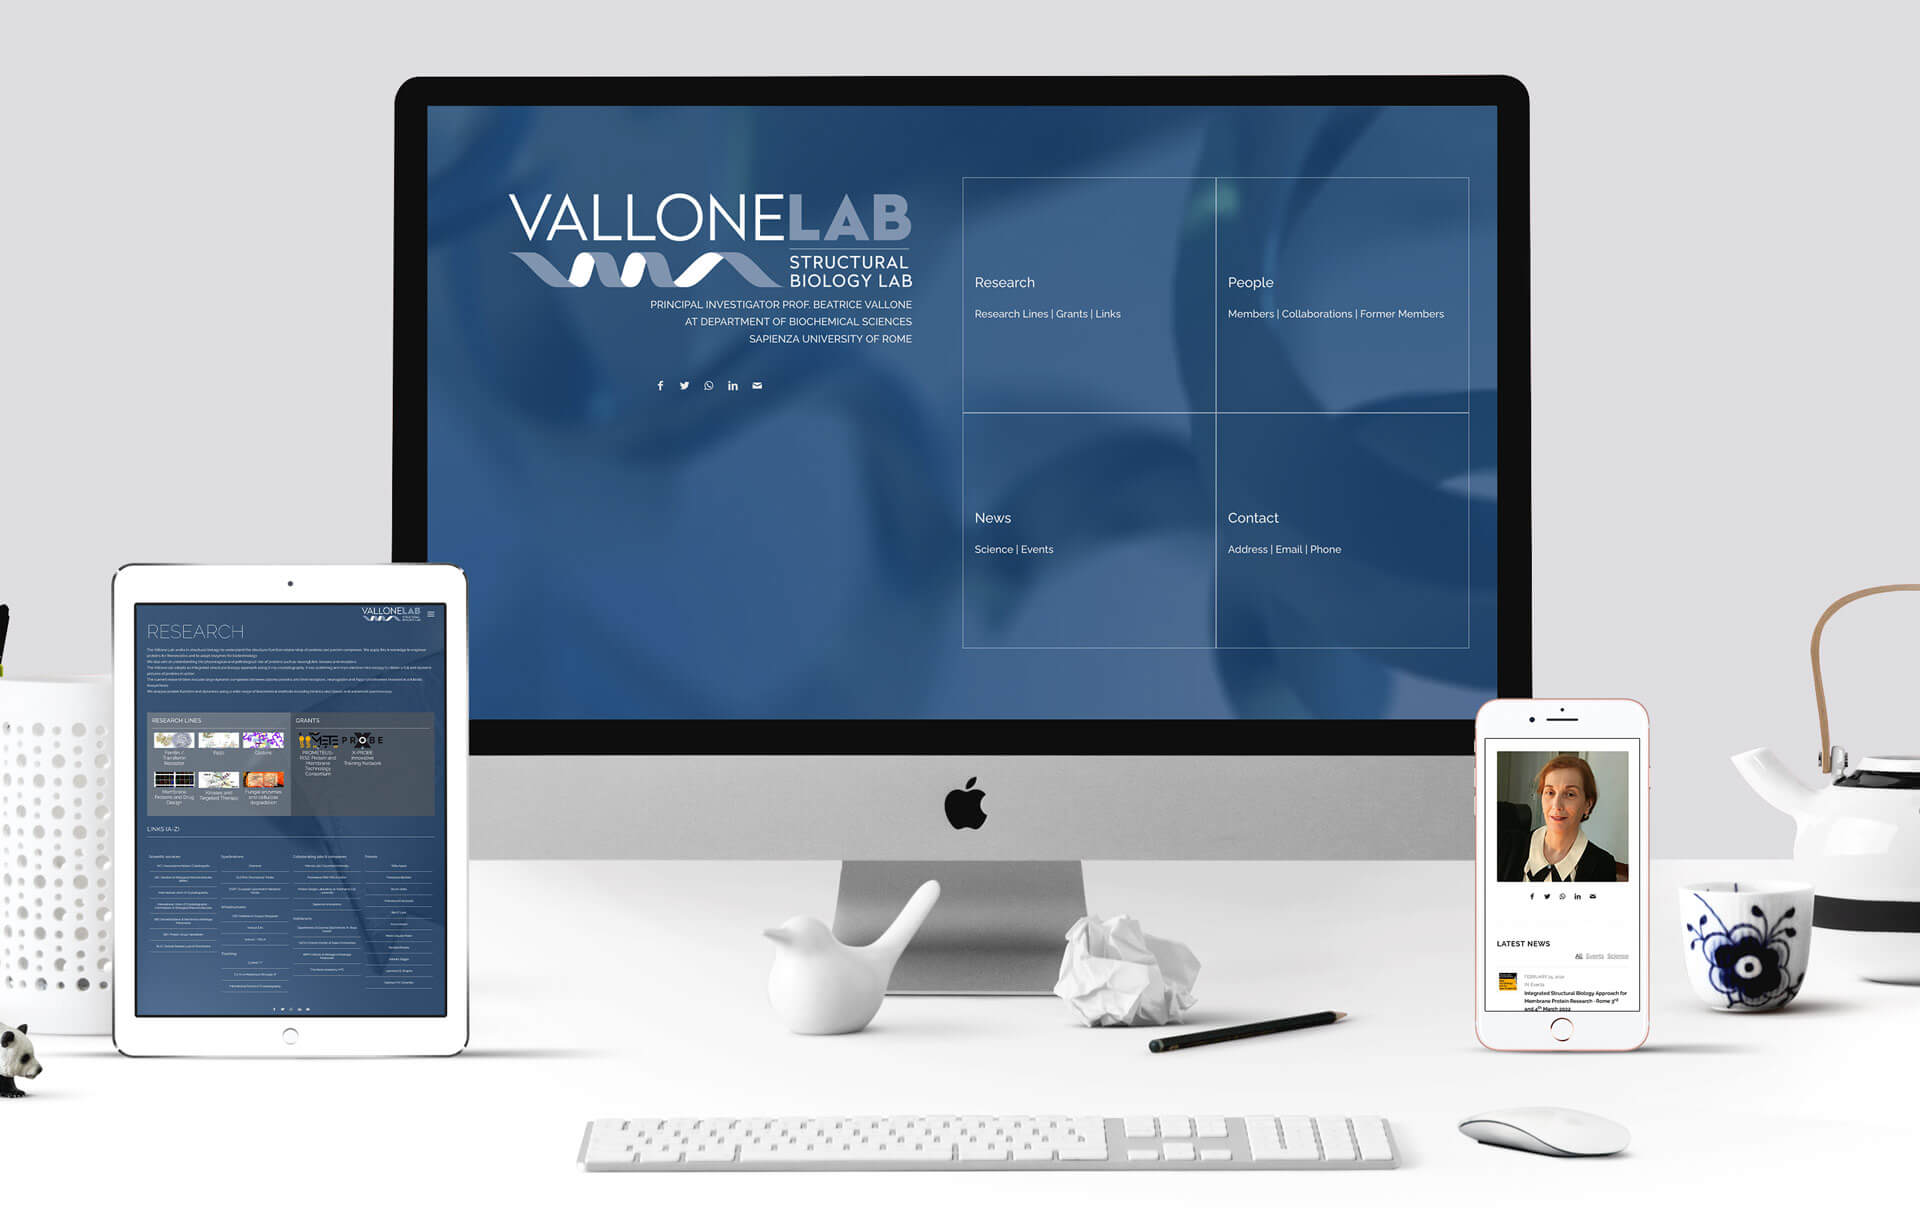 ValloneLAB Structural Biology Laboratory